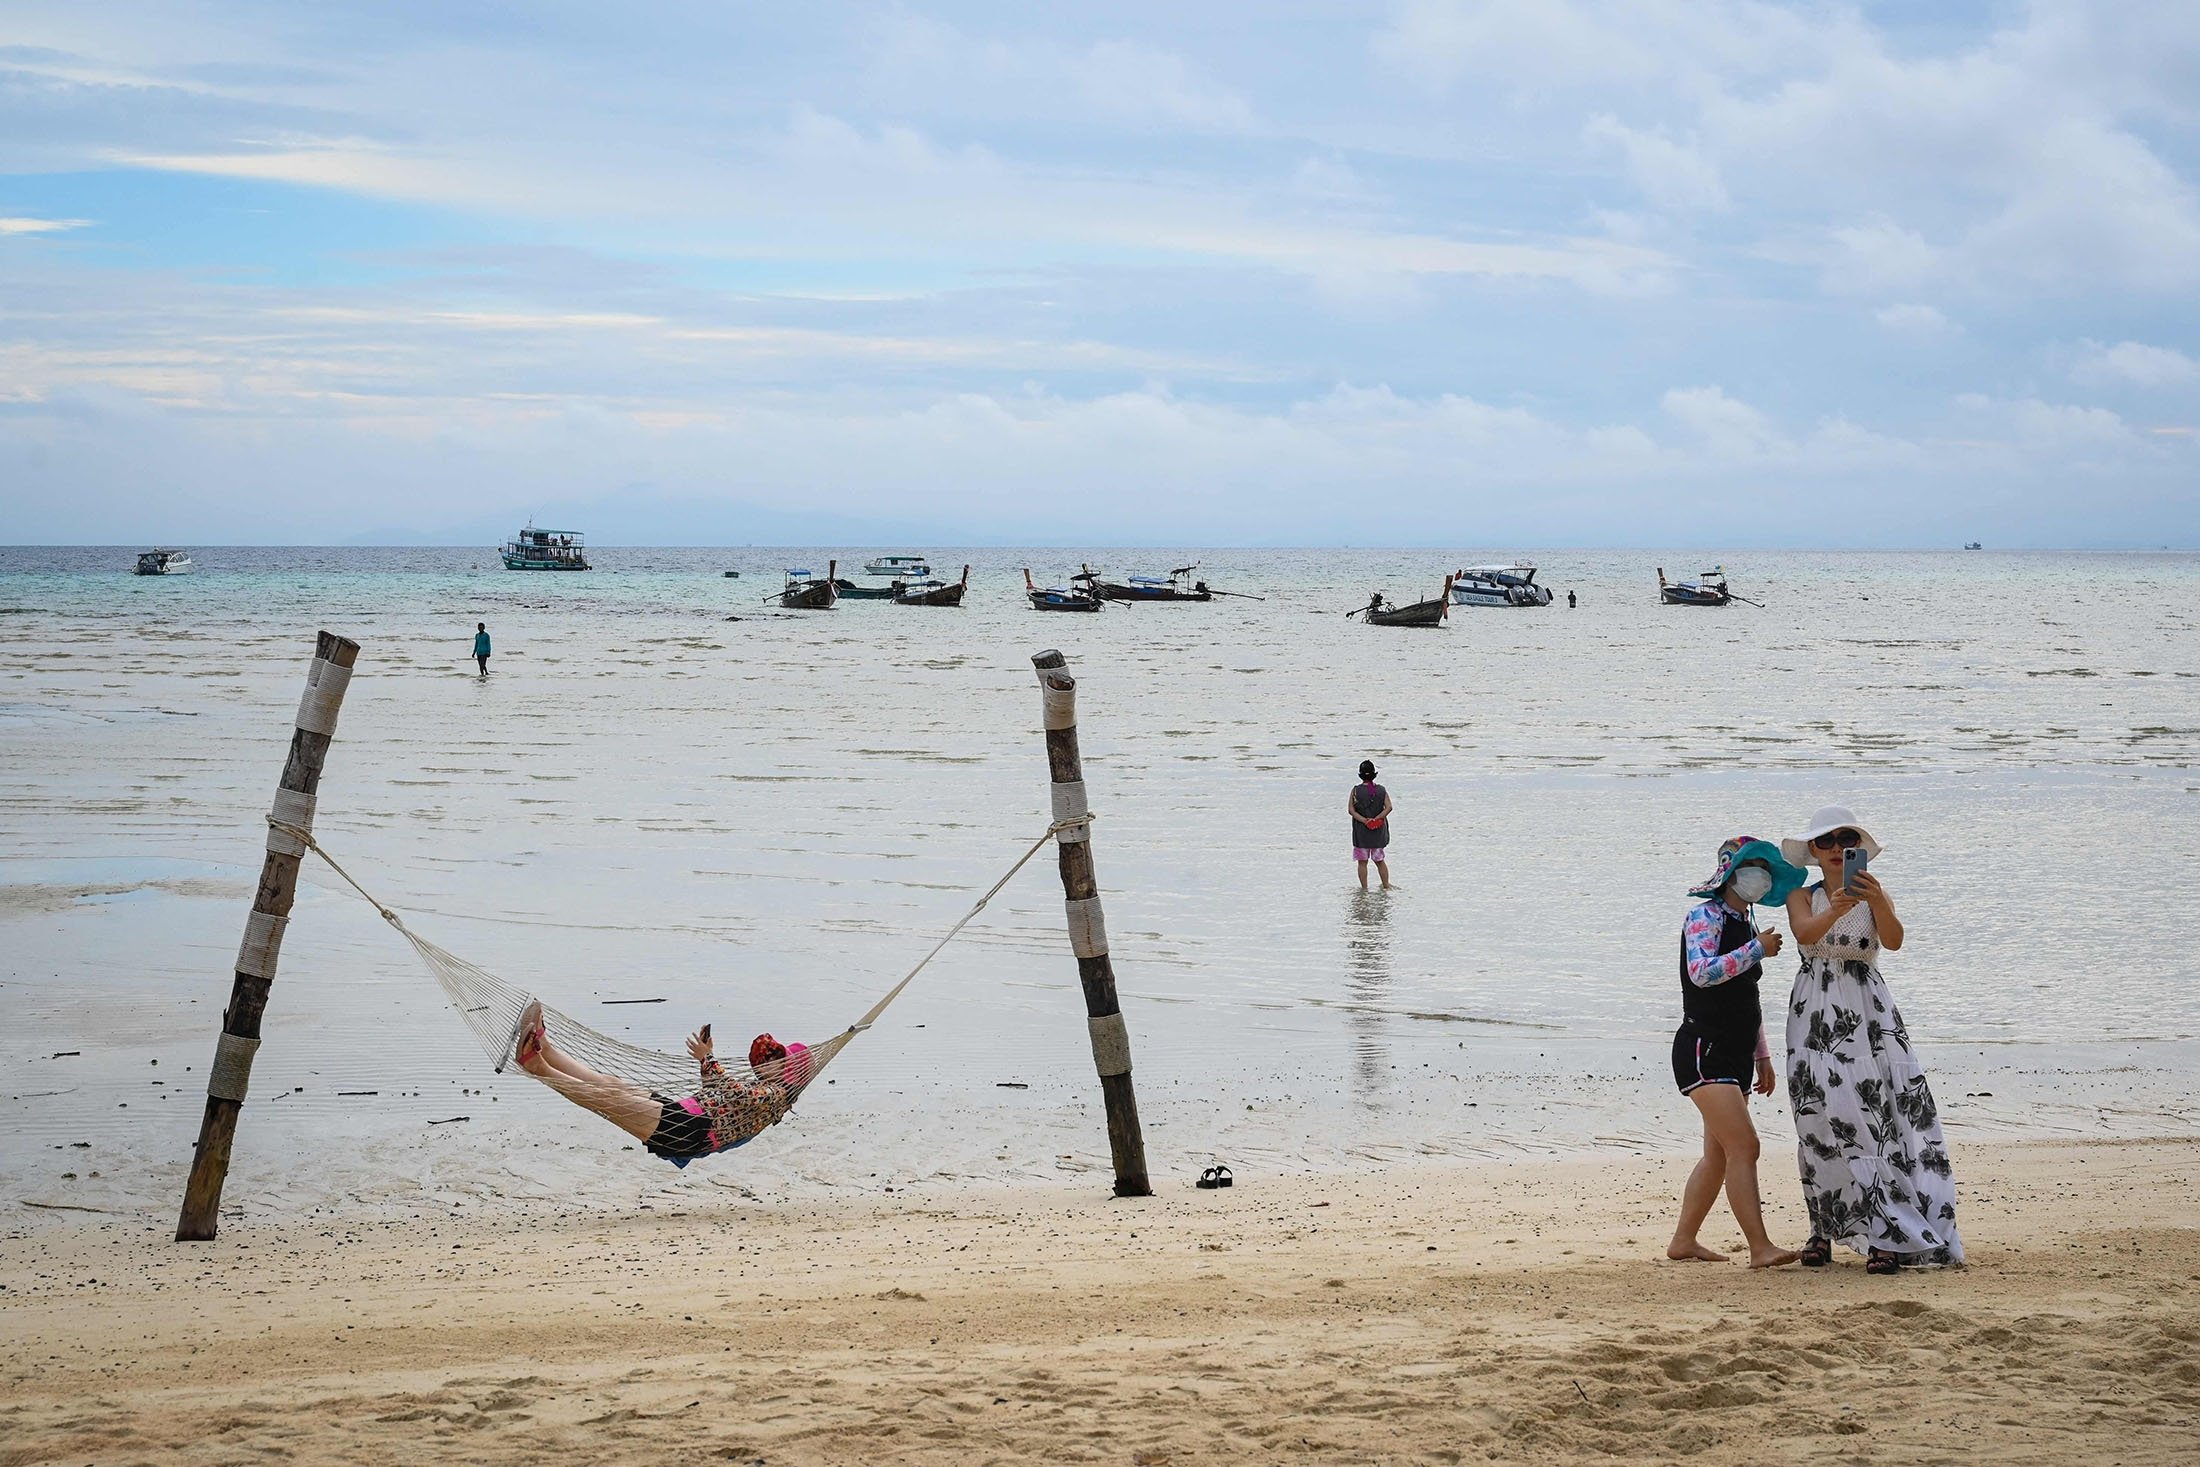 Tourists pose for photos with their mobile phones on a beach on the Phi Phi Don island, Thailand, Nov. 26, 2021. (AFP Photo)